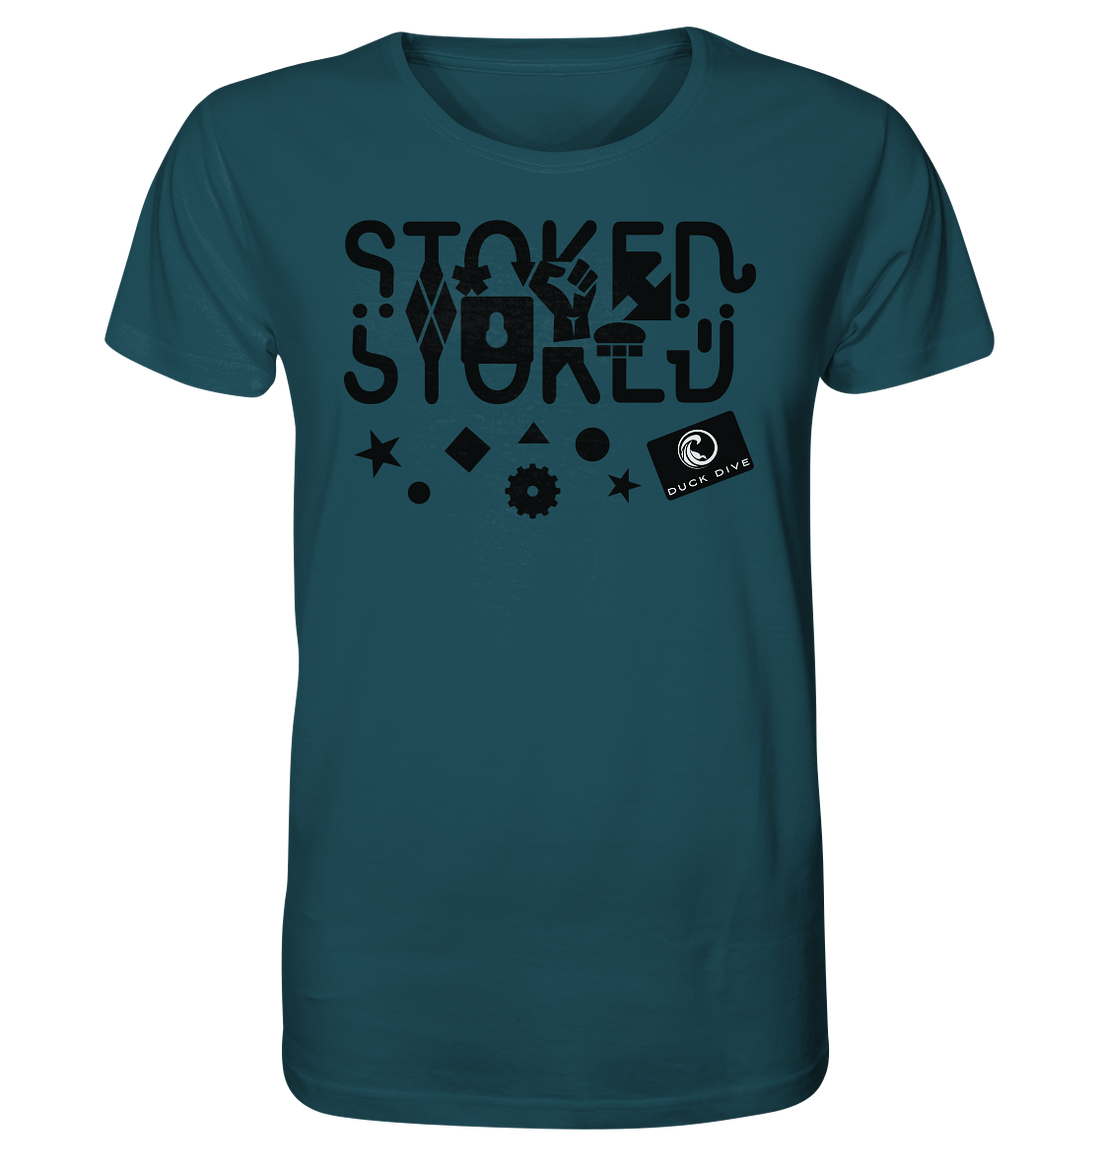 Stoked Floded - Organic Shirt - Duck Dive Clothing